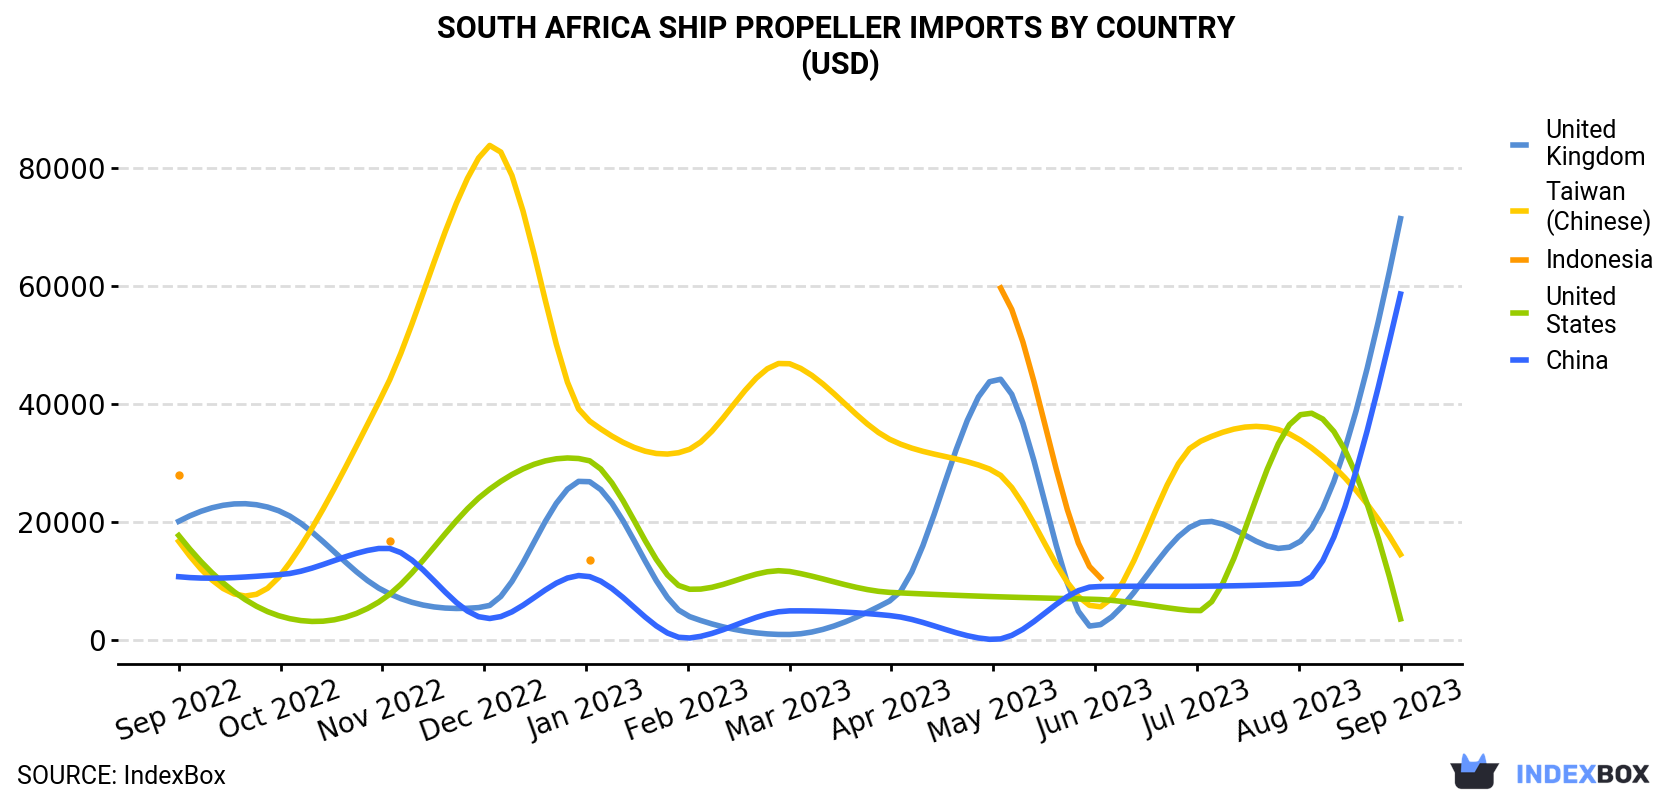 South Africa Ship Propeller Imports By Country (USD)